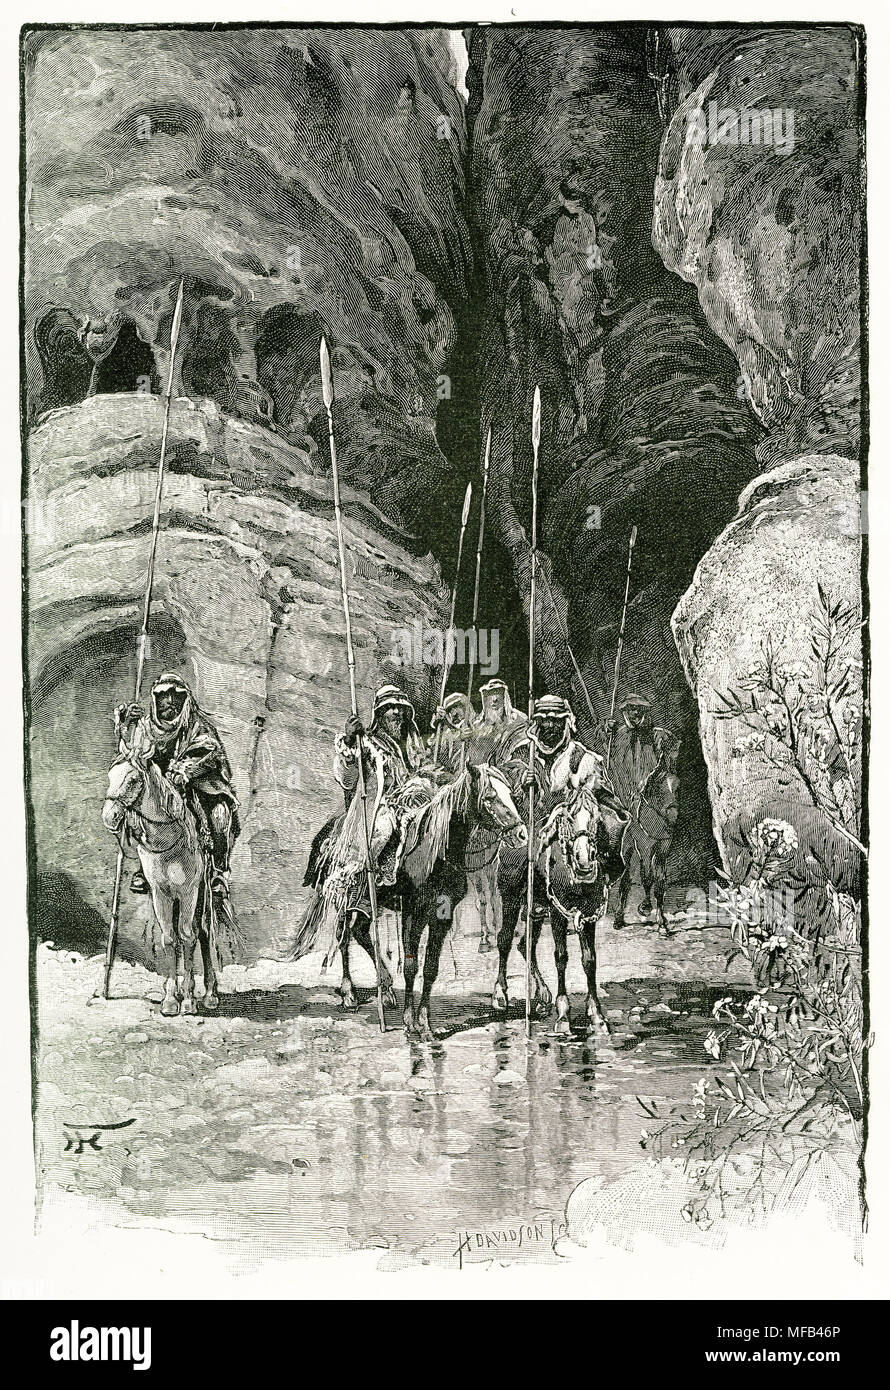 Engraving of armed and mounted bedouins in the Khuzneh Gorge near Petra. From an original engraving in the 1891 edition of In Scripture Lands by Edward L Wilson Stock Photo